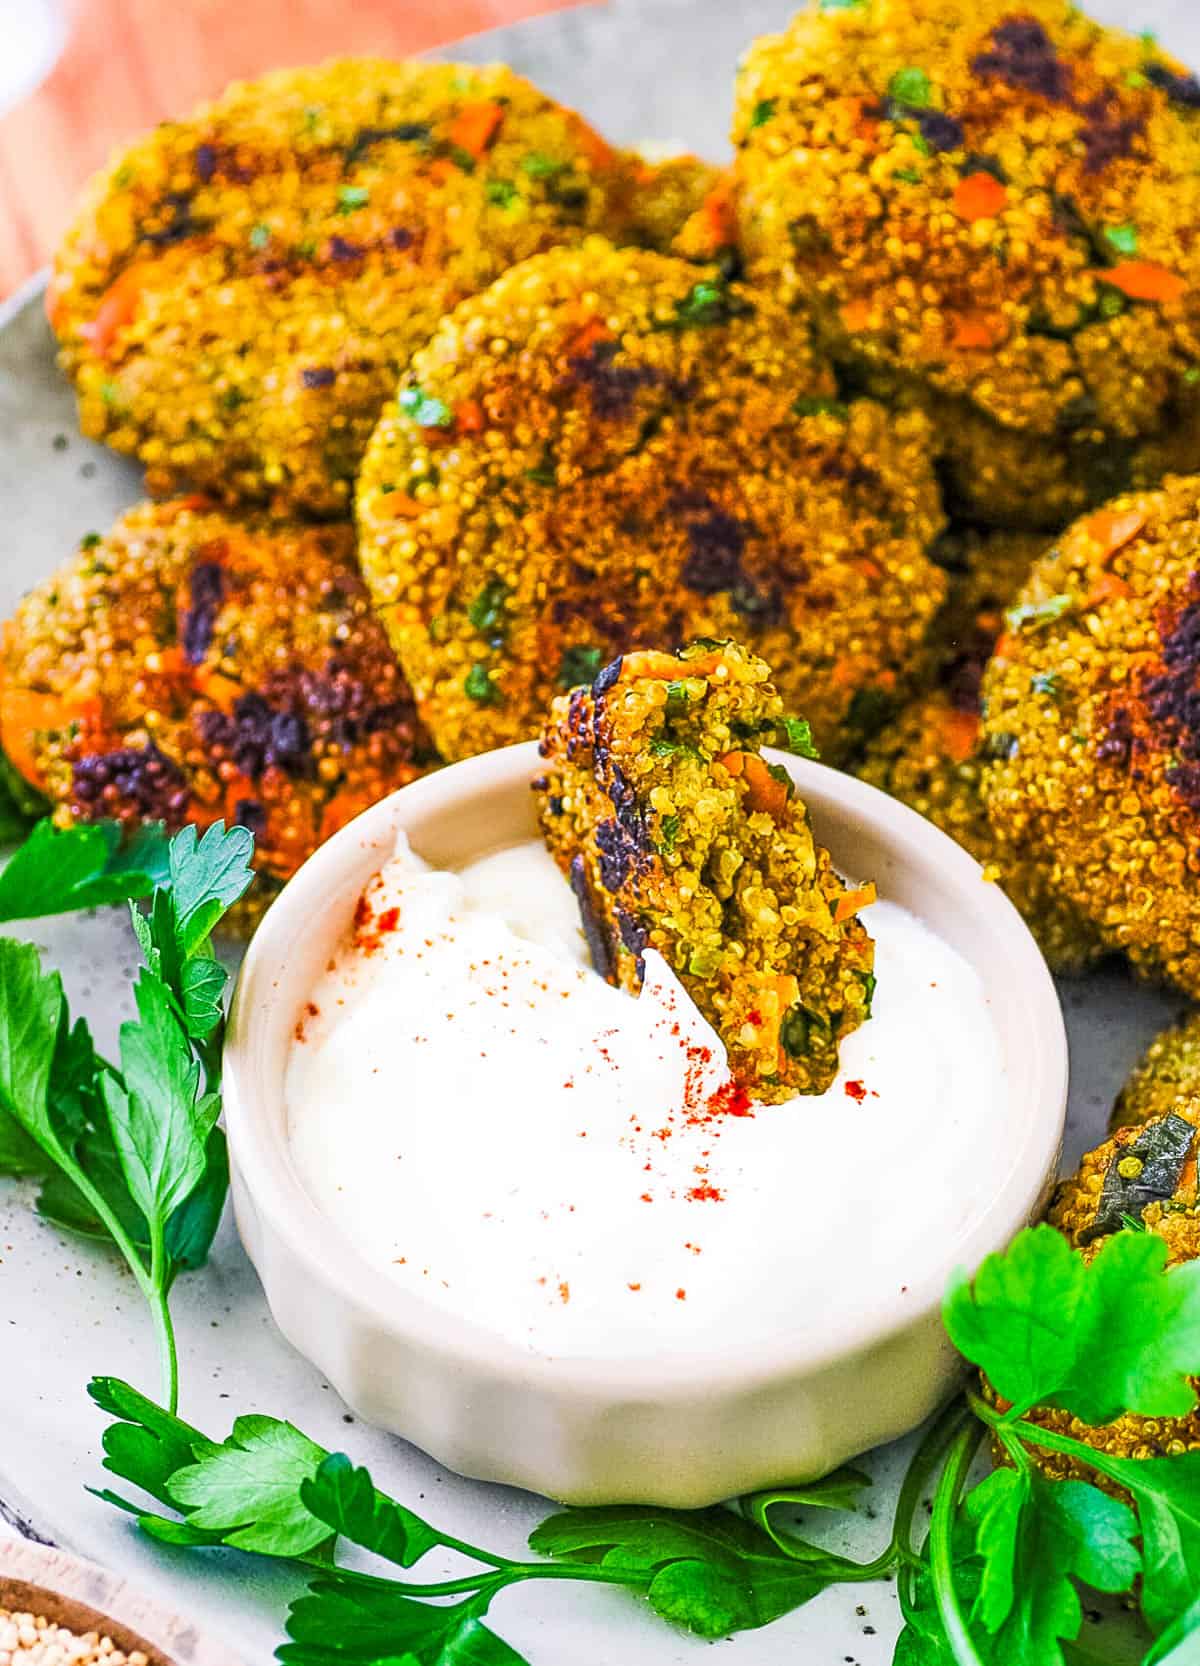 Easy quinoa patties being dipped into dipping sauce.